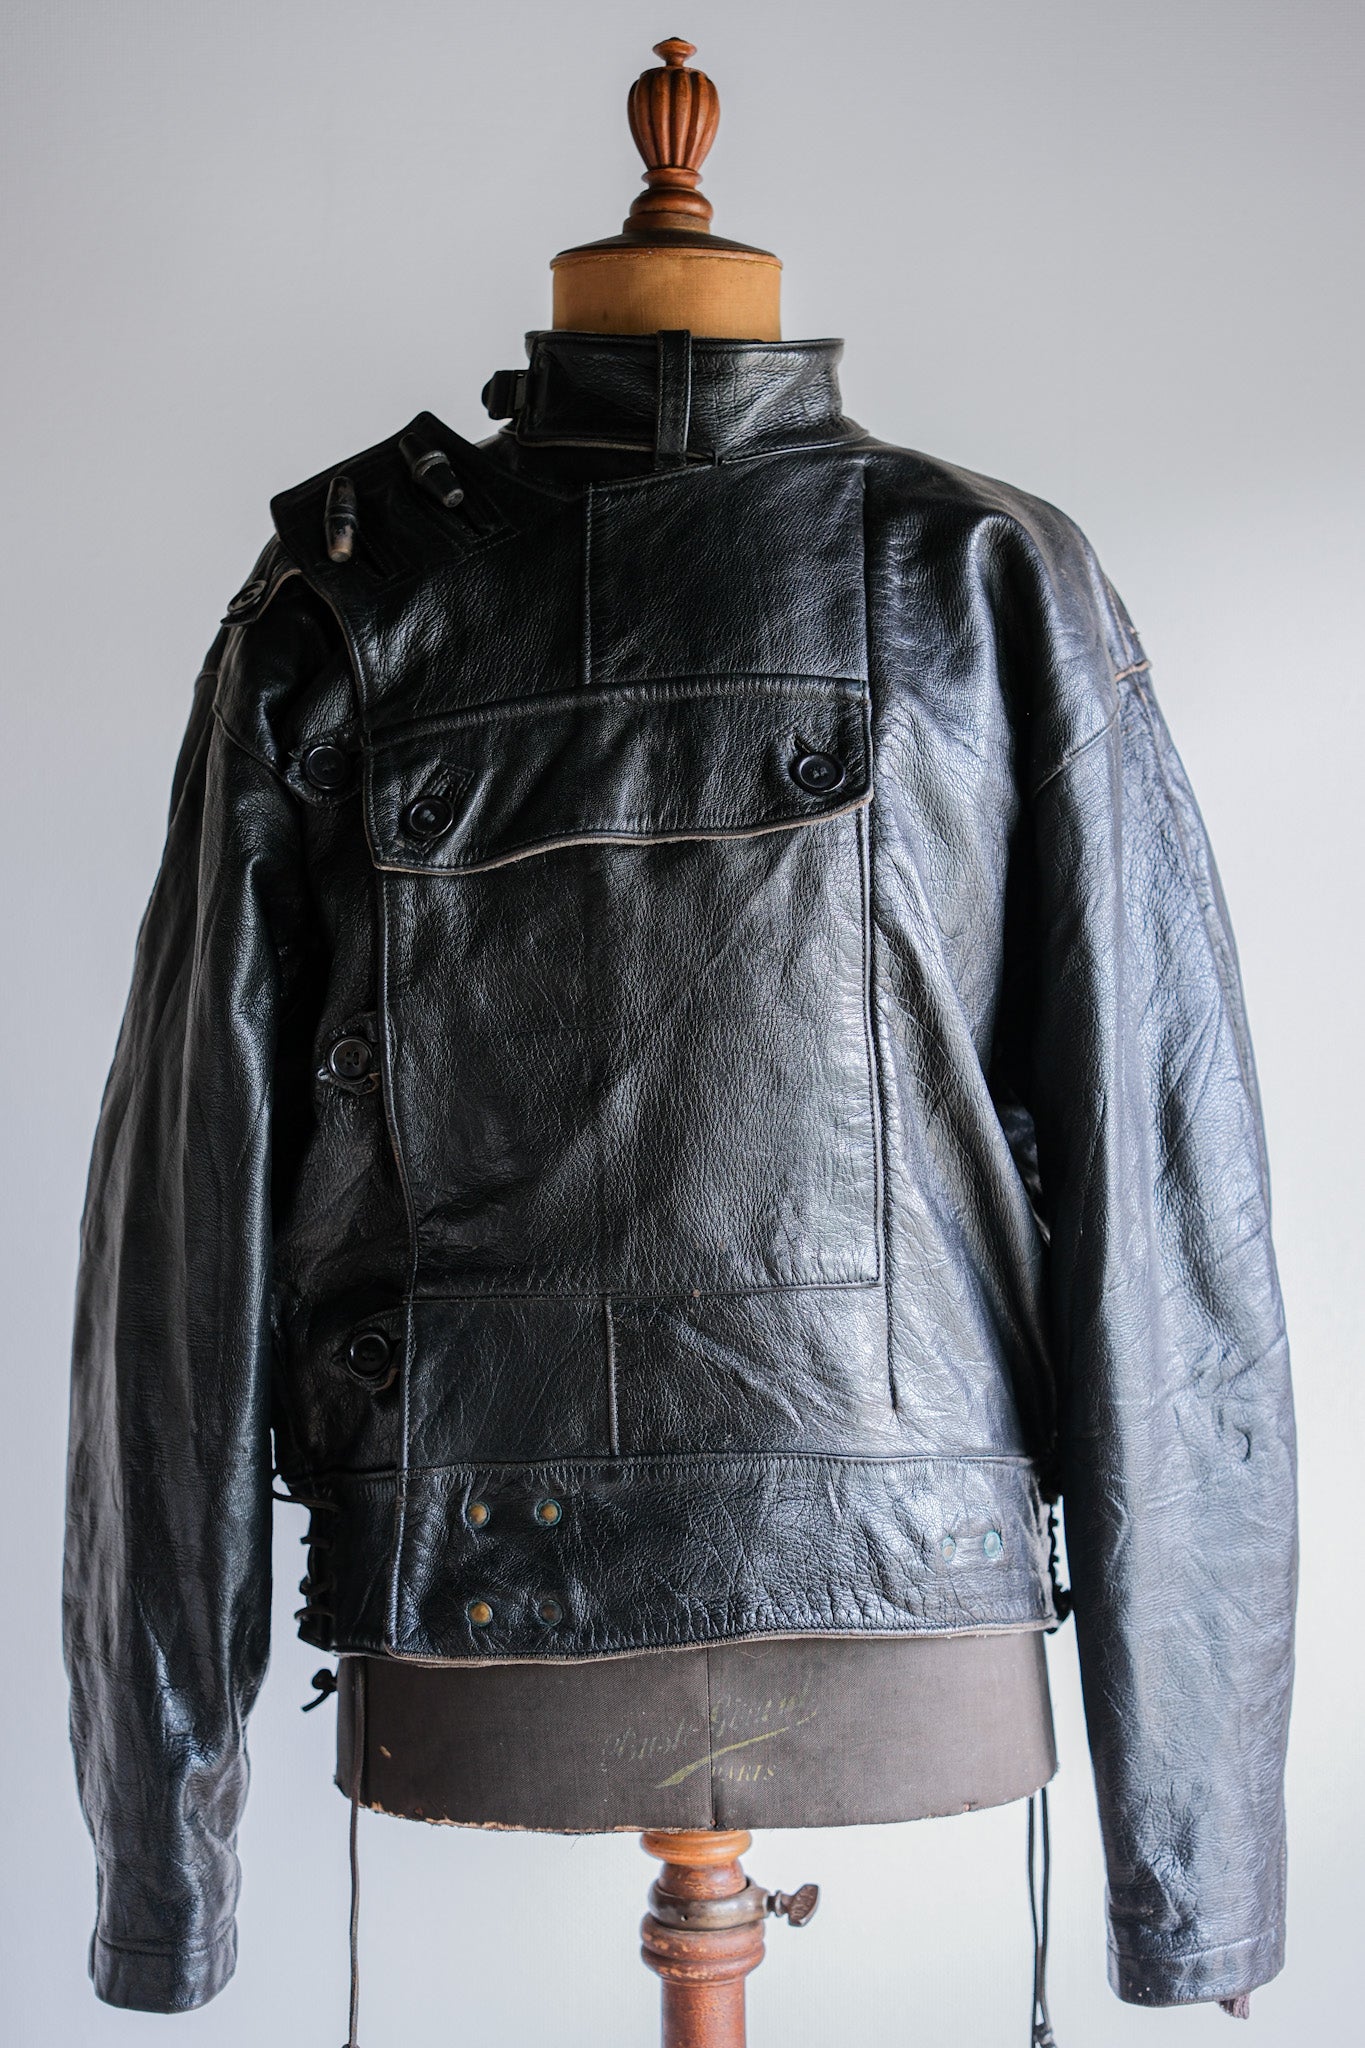 [~ 50] Souedish Army Dispatch Rider Leather Motorcycle Veste Taille.50